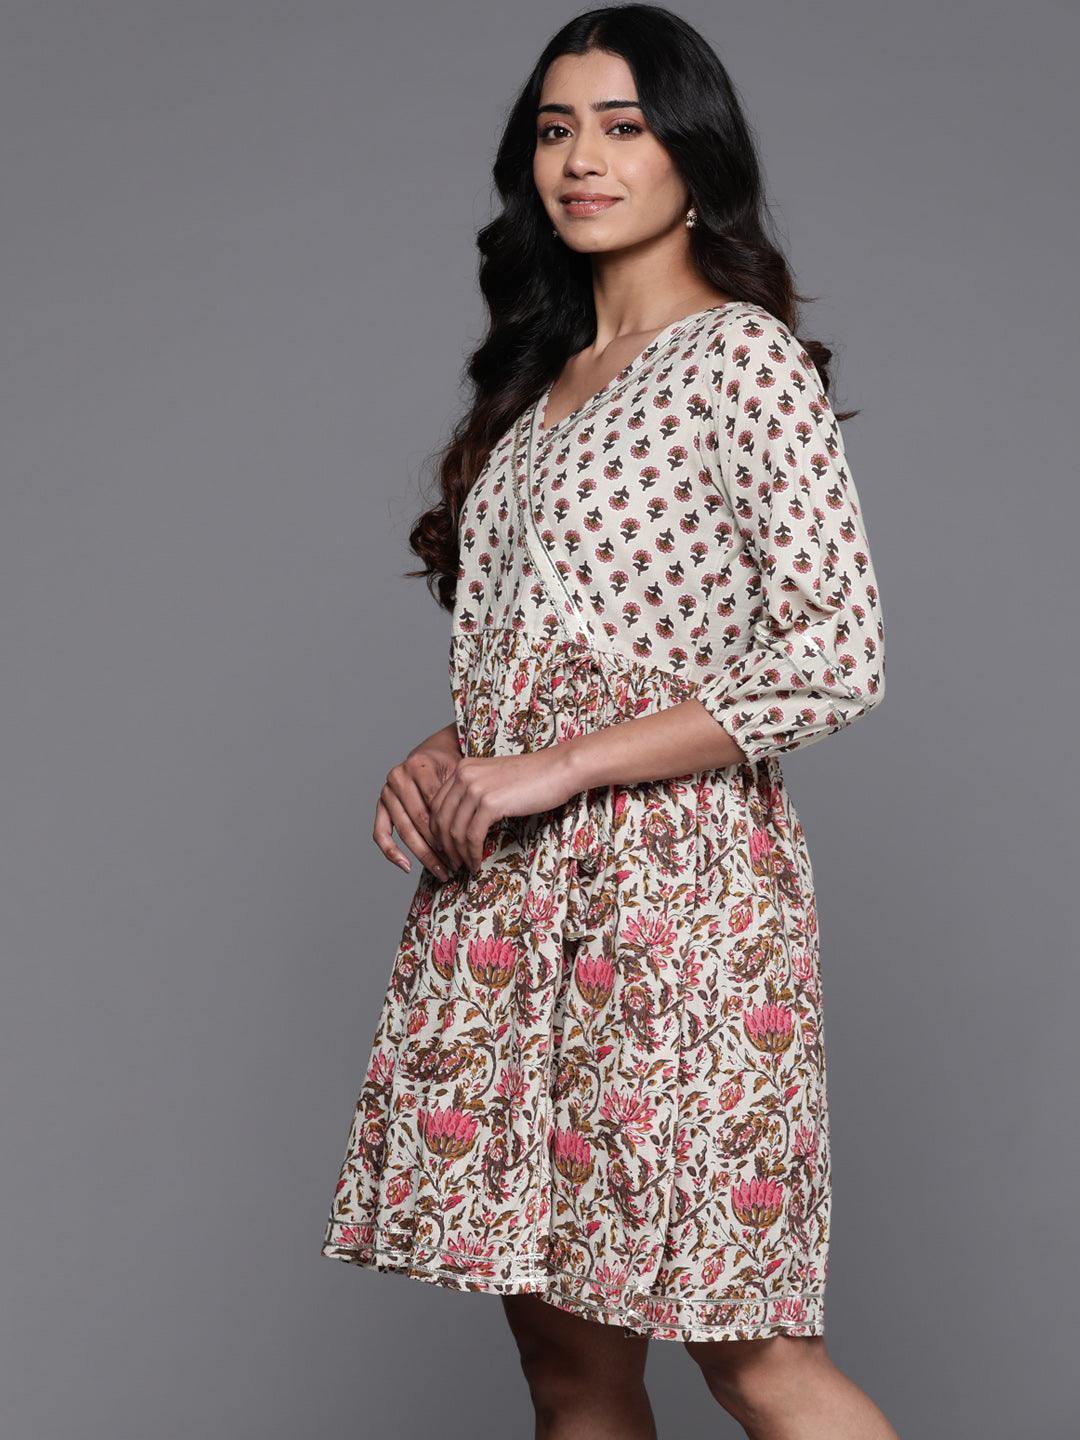 Beige Printed Cotton Fit and Flare Dress - Libas